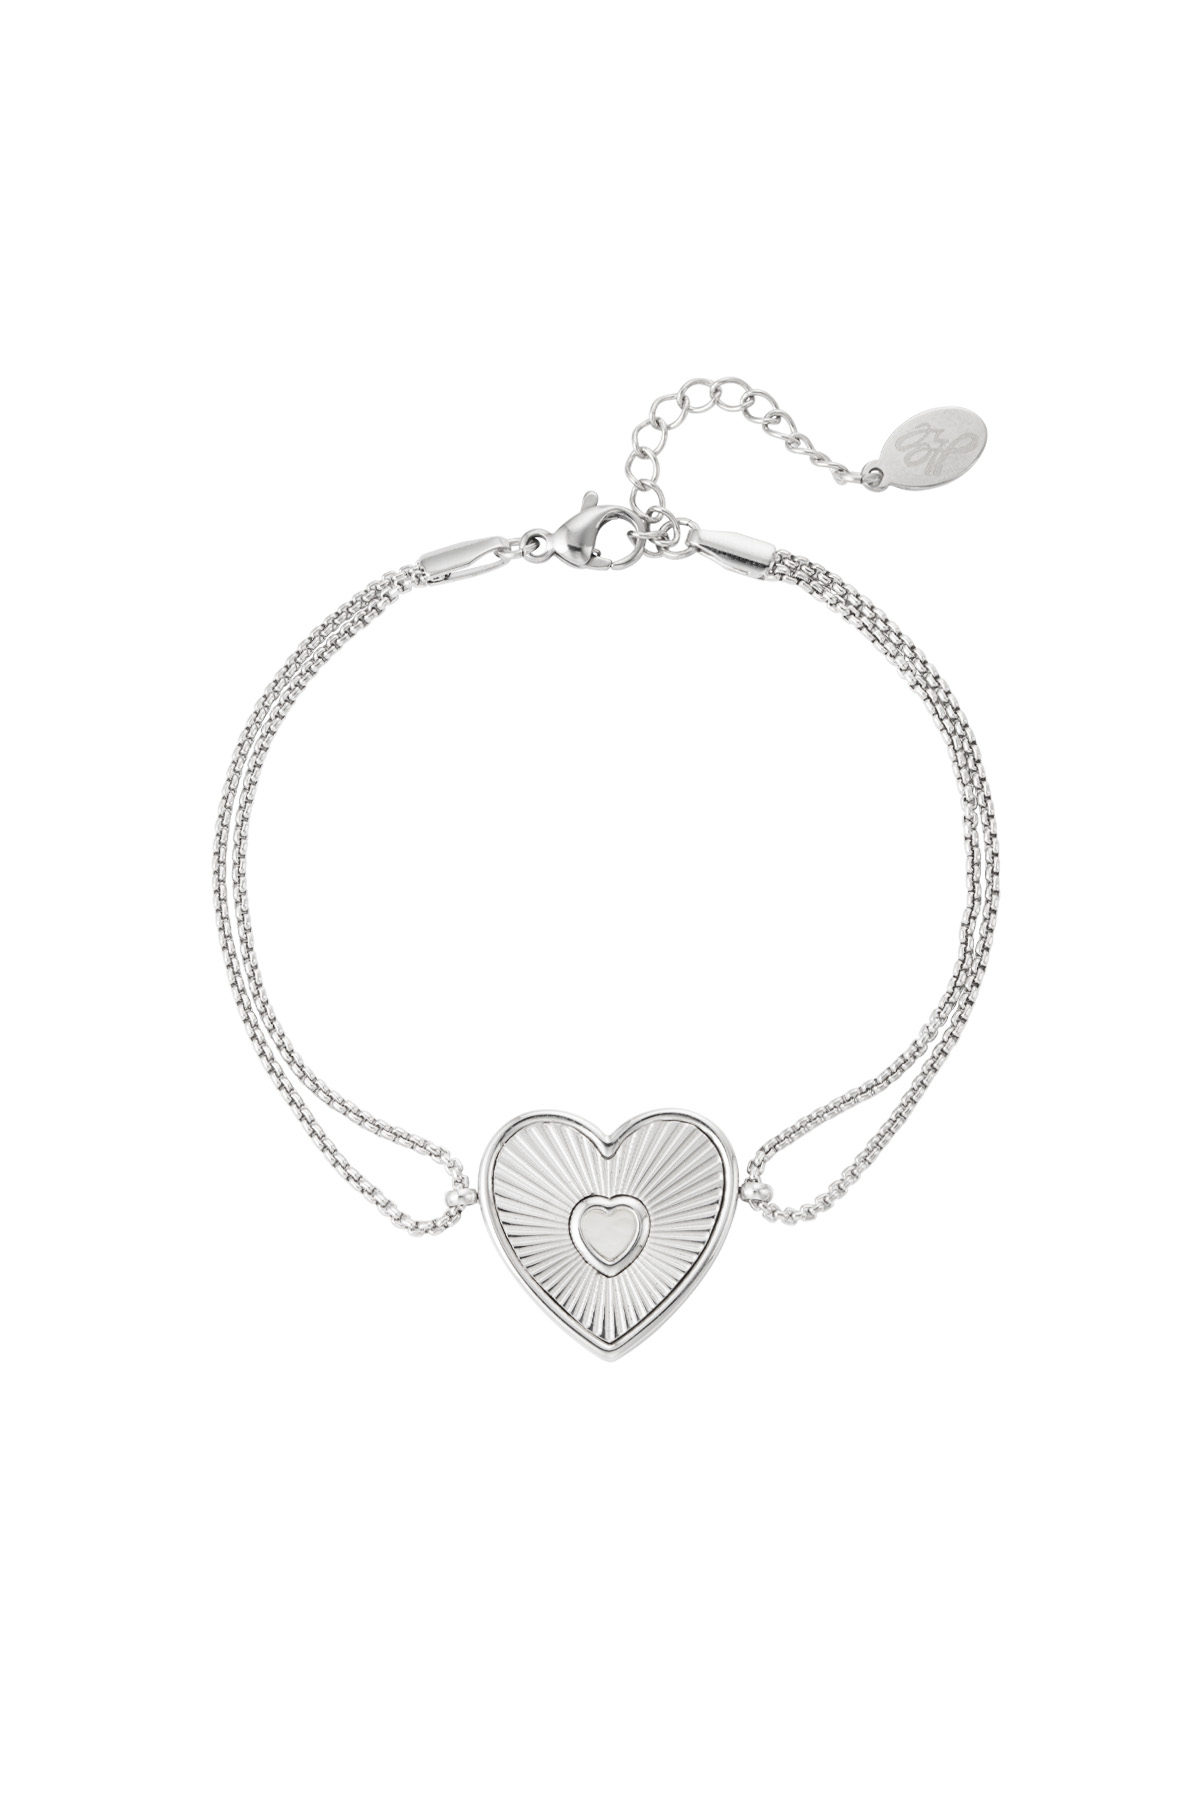 Armband lover heart - zilver 